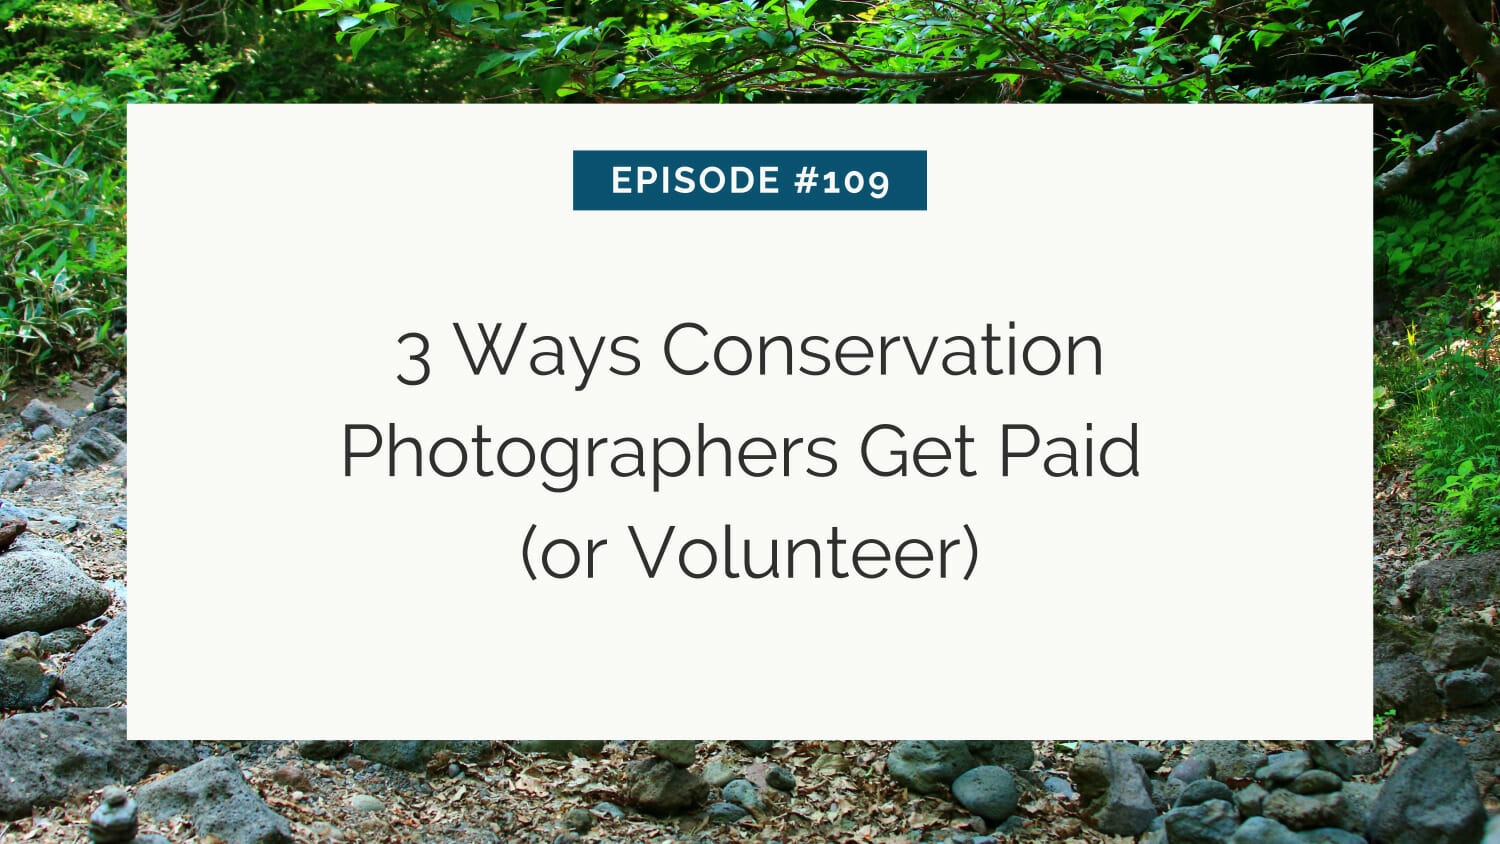 Title slide presenting episode #109 about ways conservation photographers get compensated, either through payment or volunteering.